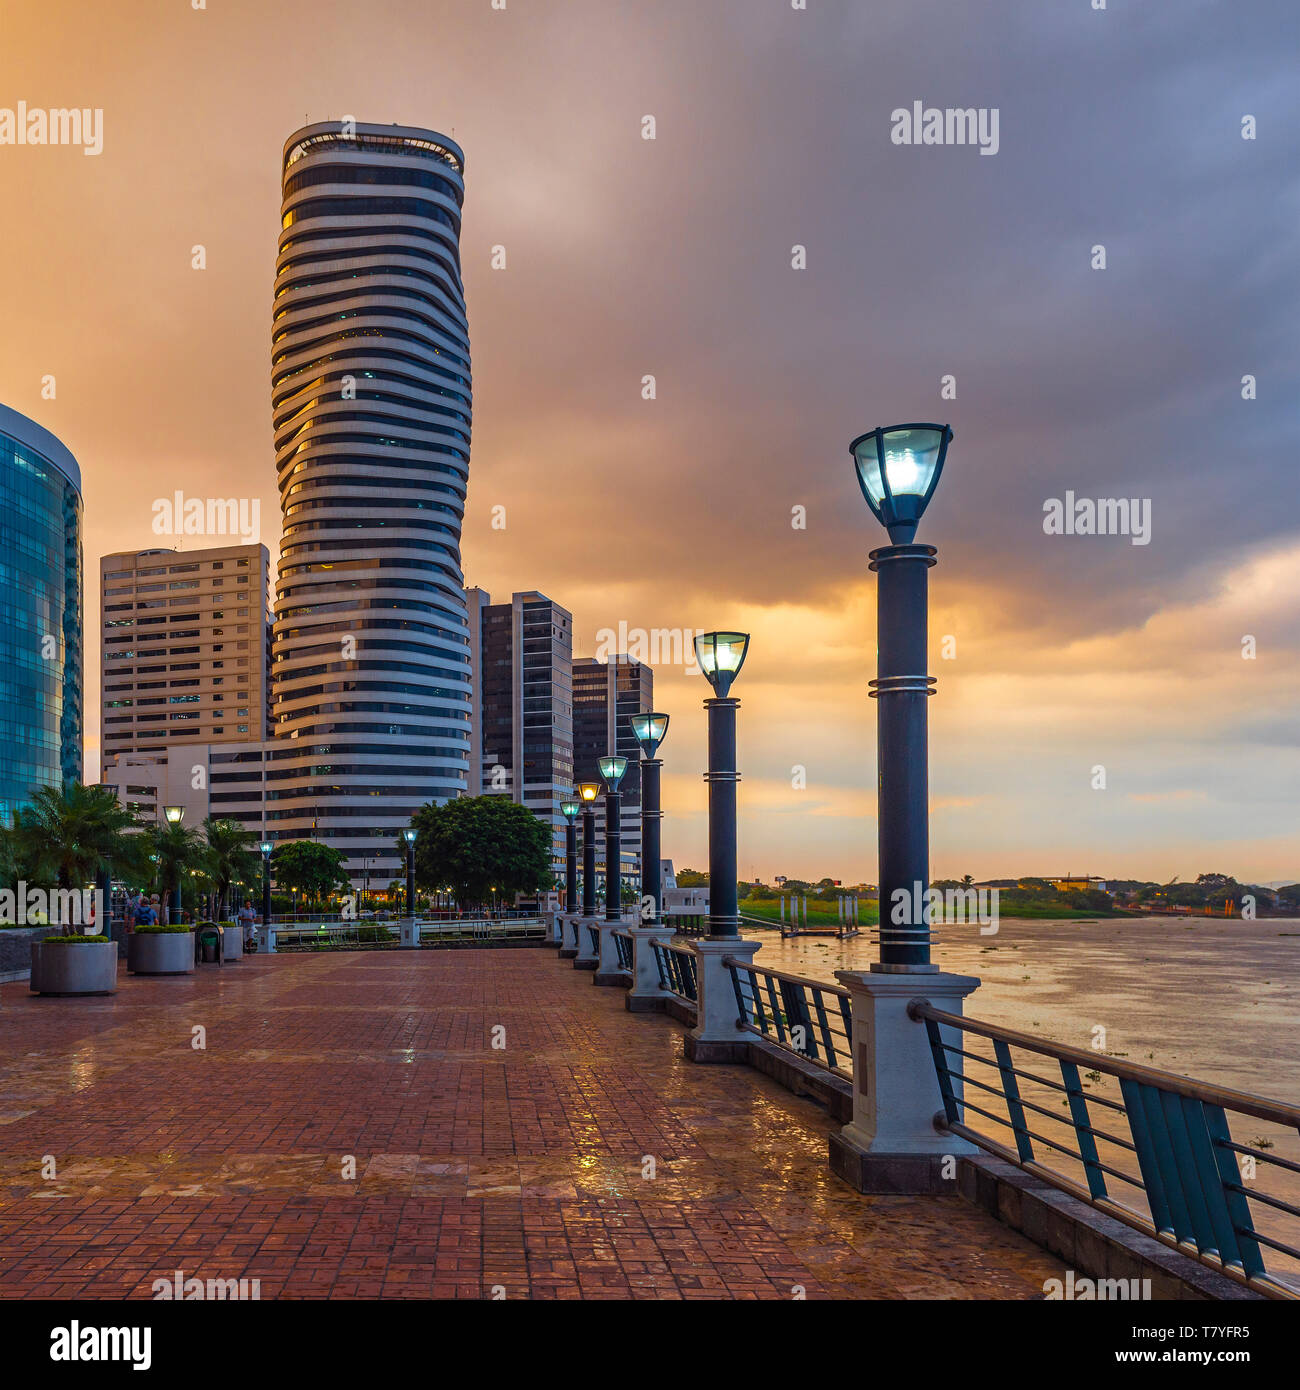 Square cityscape of Guayaquil city at sunset with the Malecon 2000 waterfront, the Guayas river and the point skyscraper after a thunderstorm, Ecuador. Stock Photo